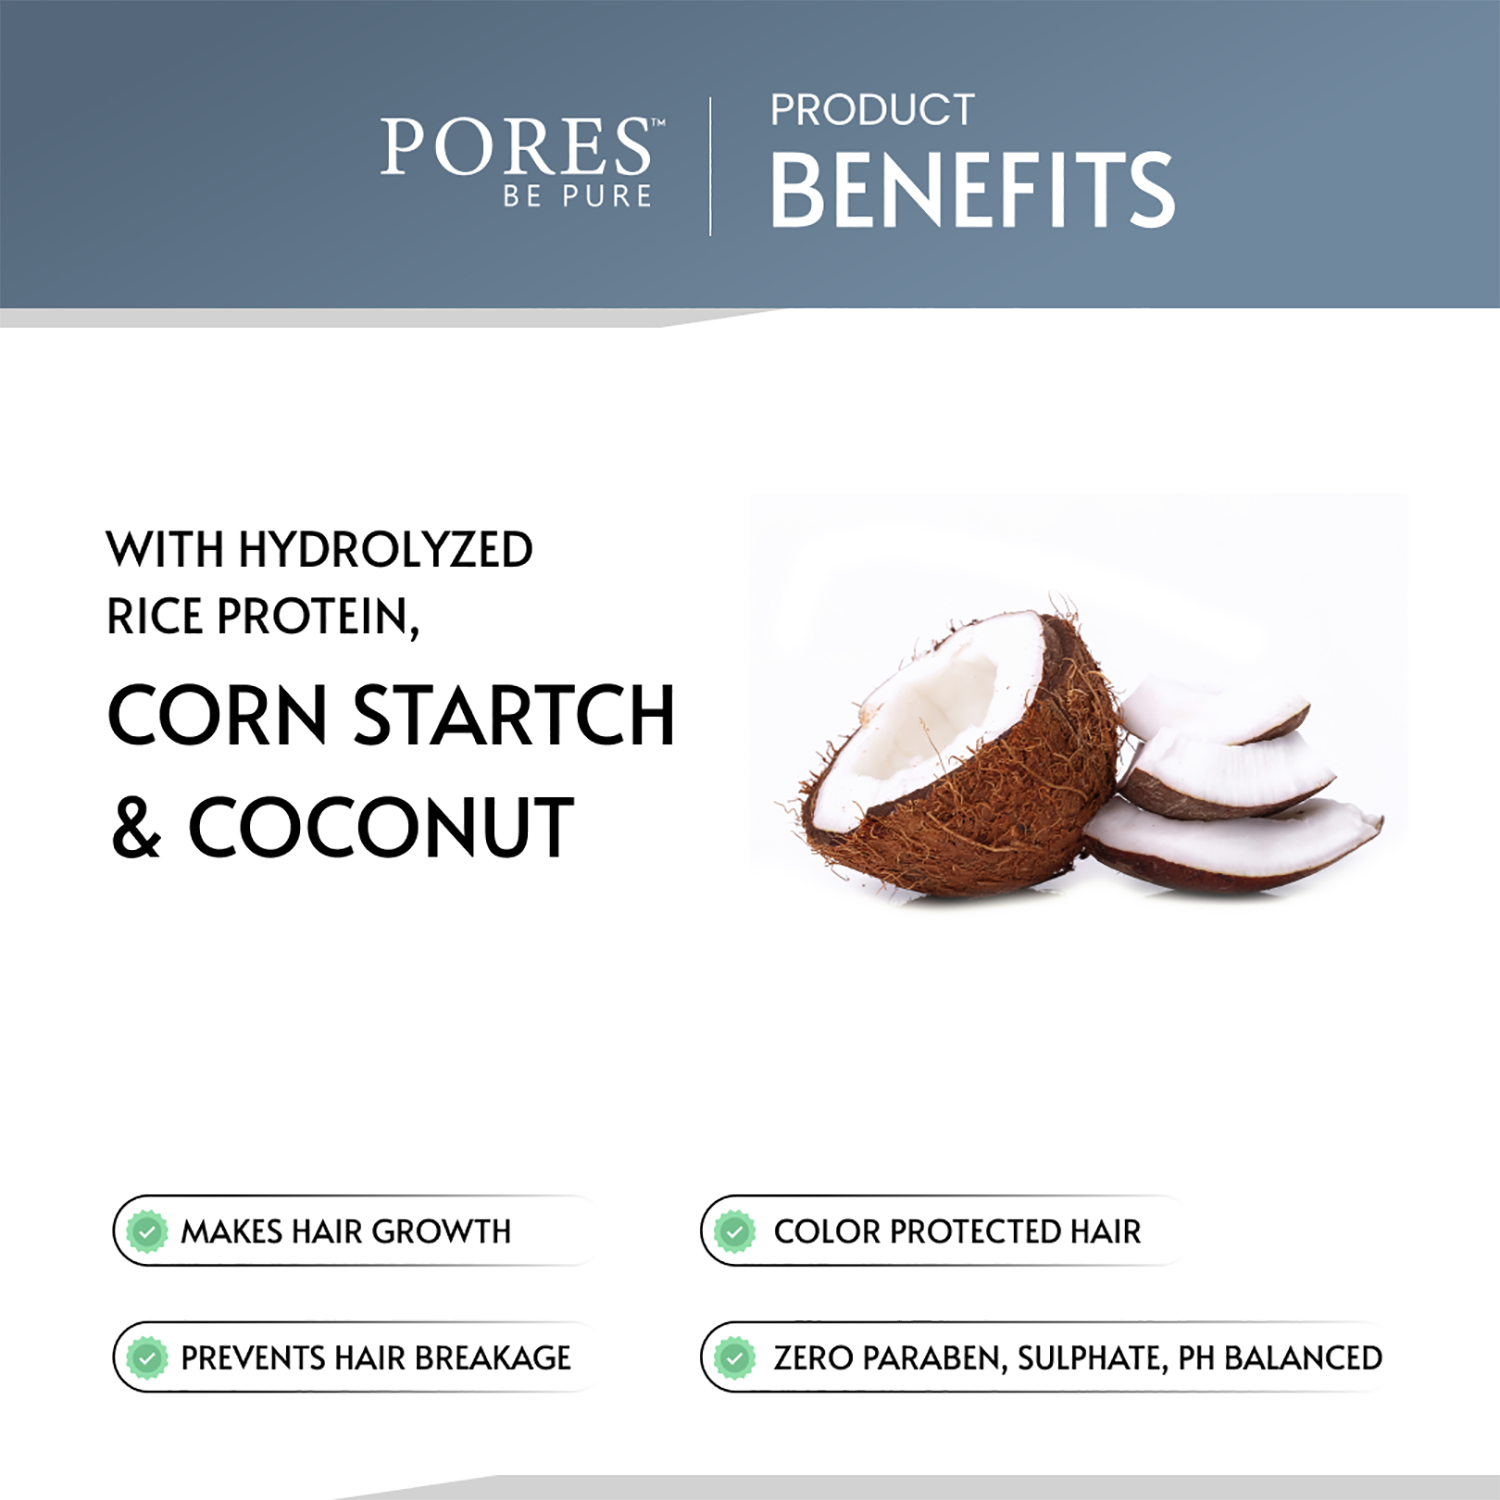 Benefits with Hydrolyzed rice Protein, Corn Starch & Coconut